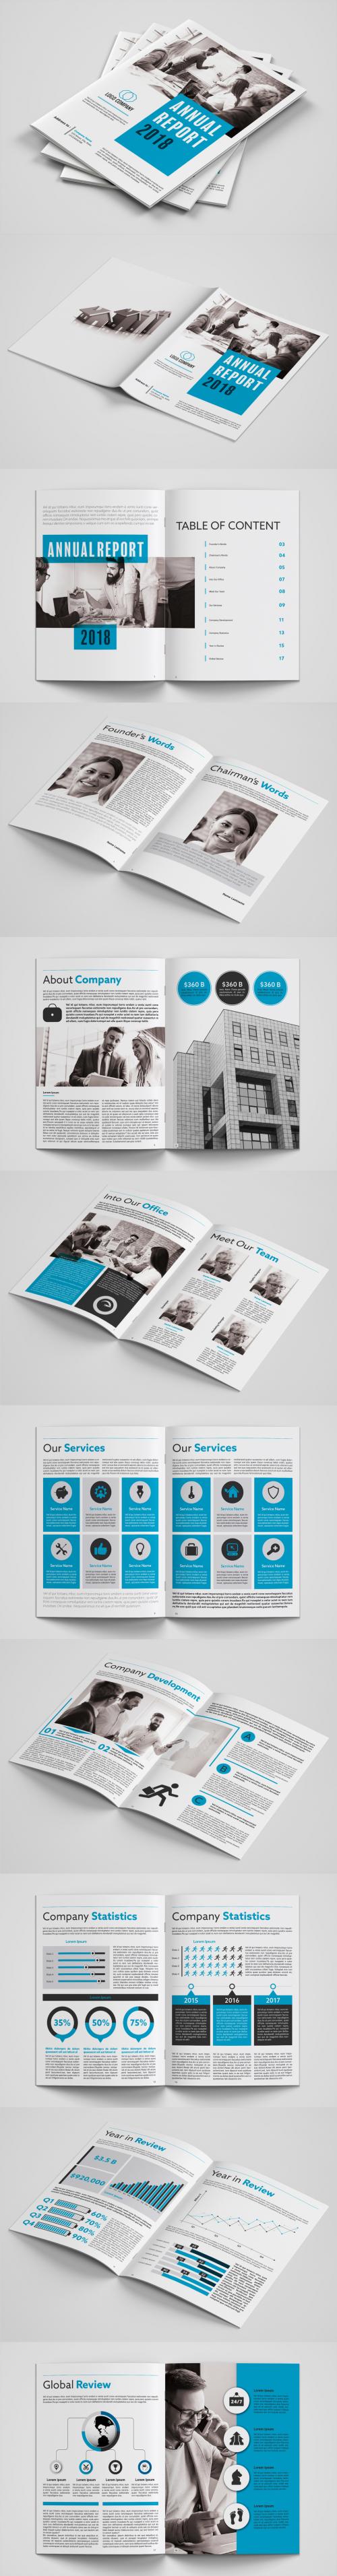 Annual Report Layout with Blue Accents - 207333902